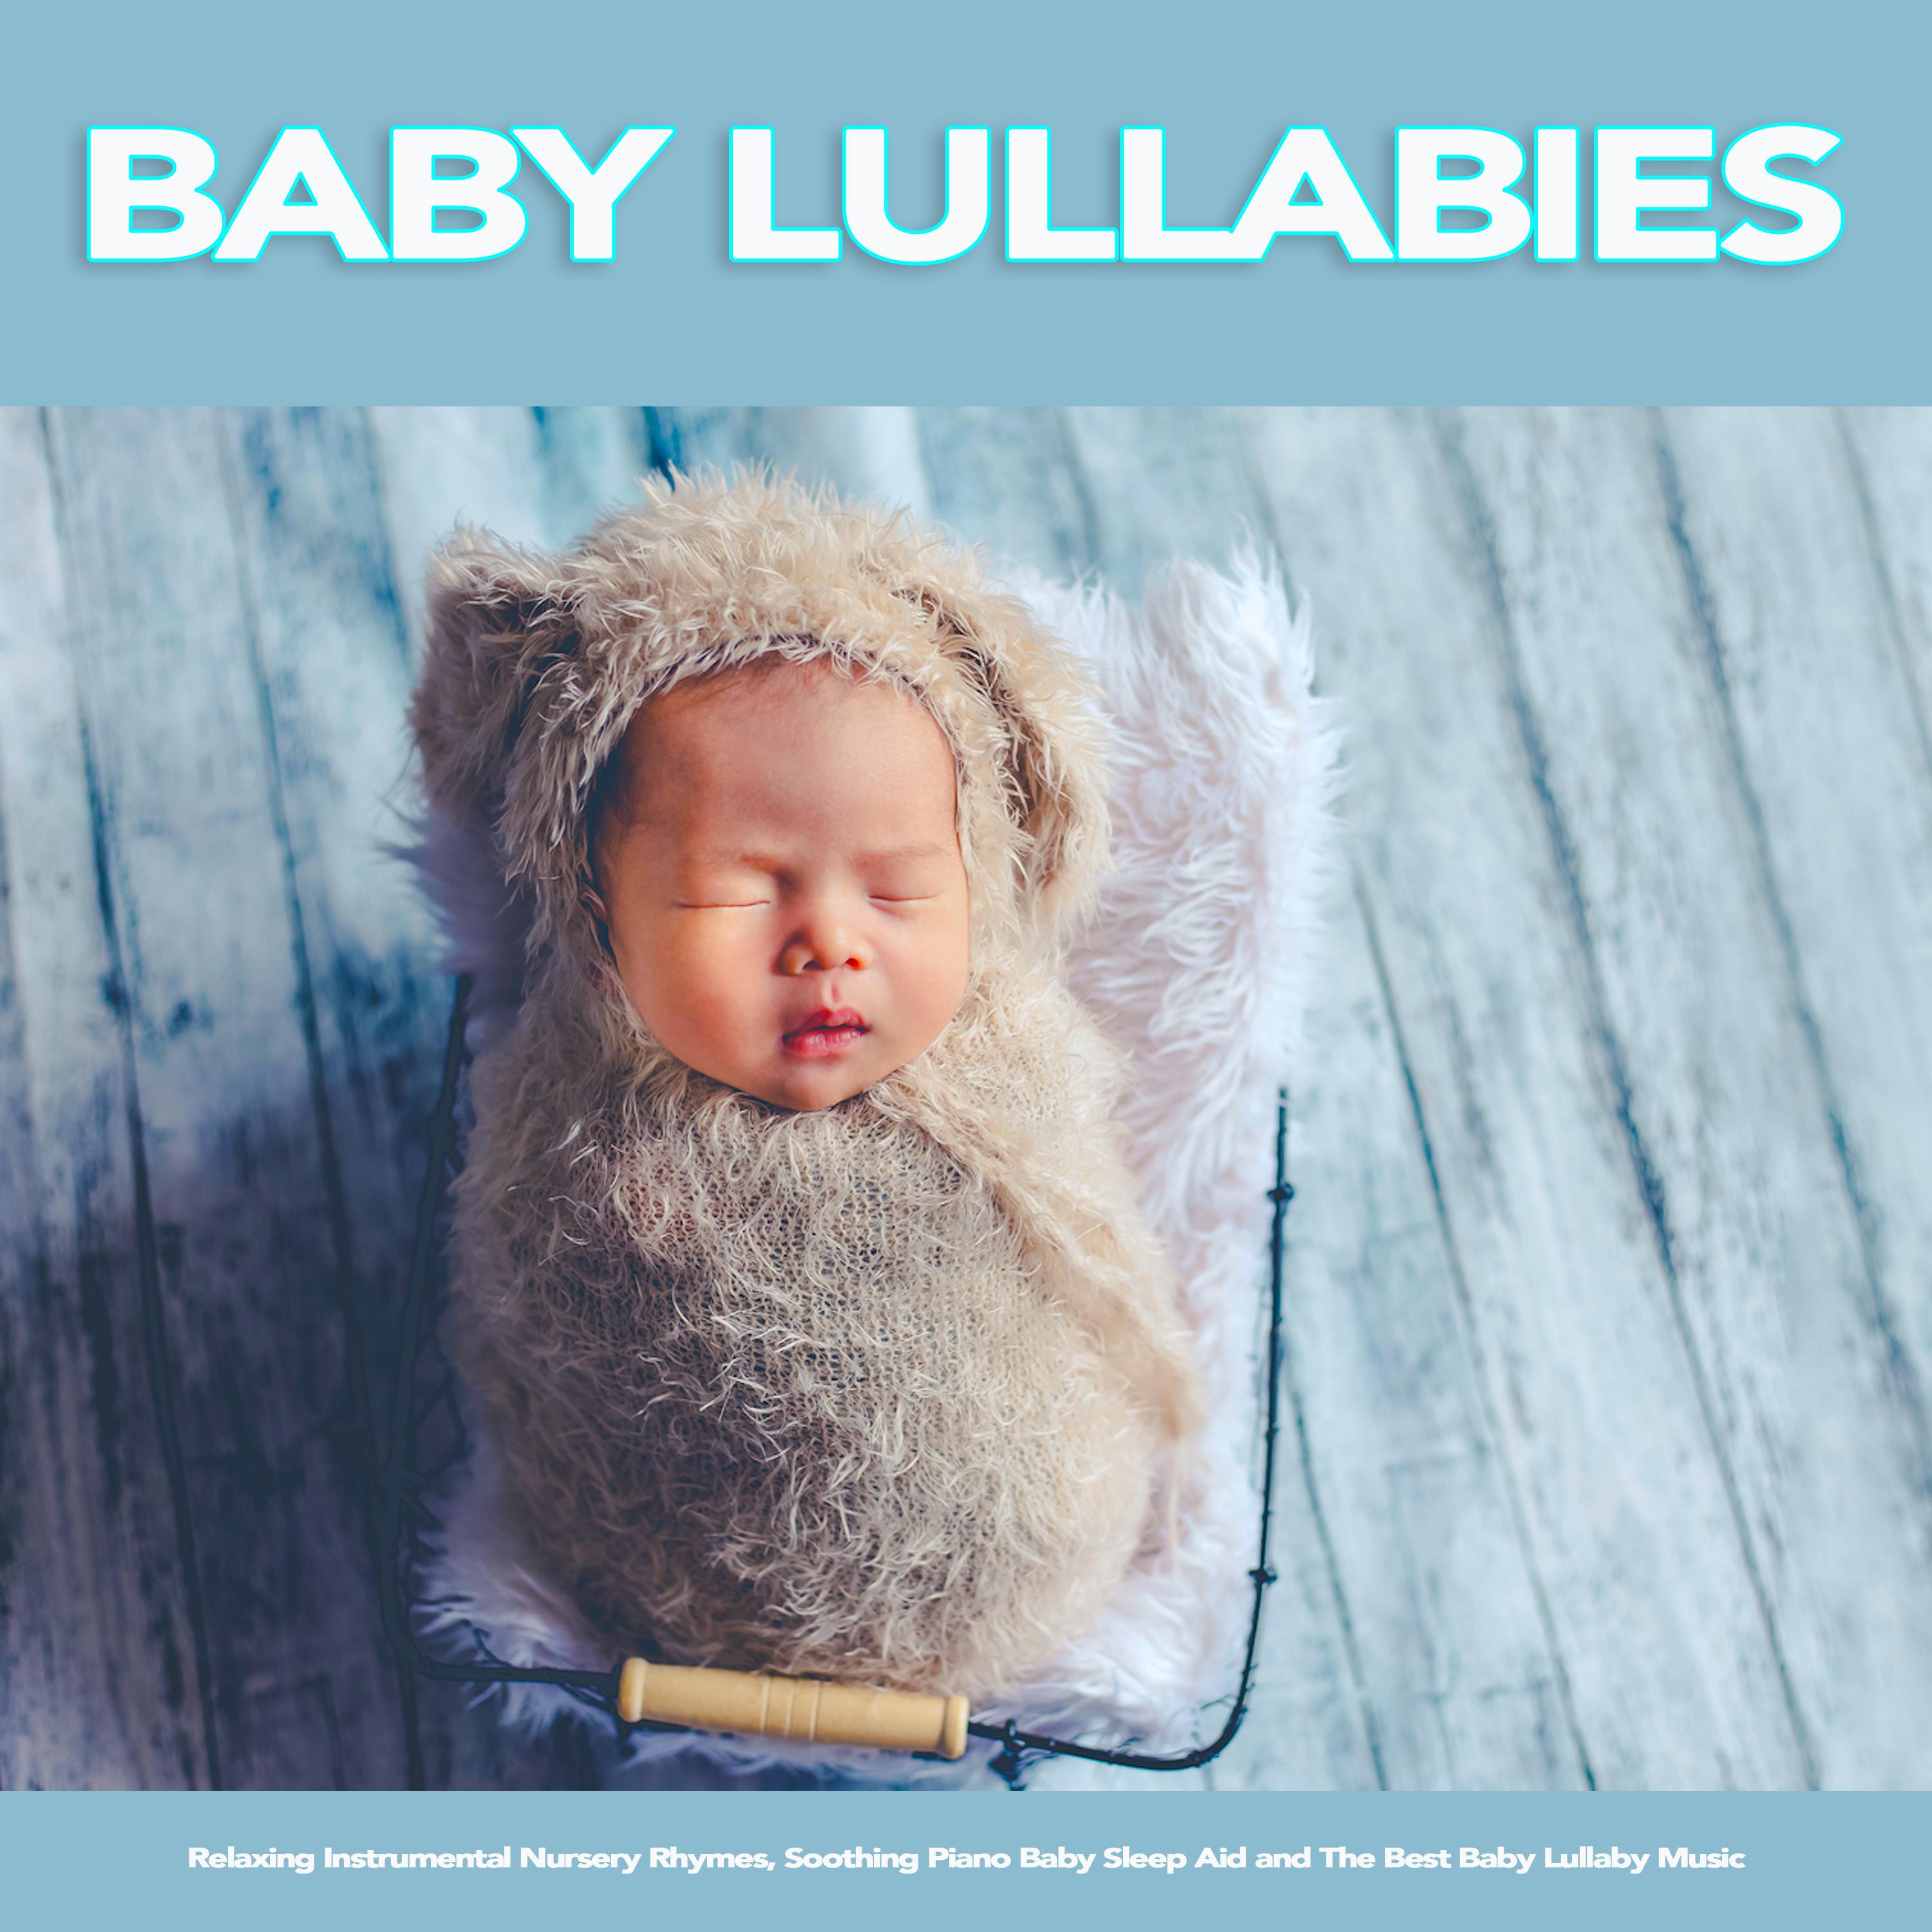 Itsy Bitsy Spider - Baby Lullabies and Nursery Rhymes For Baby Sleep